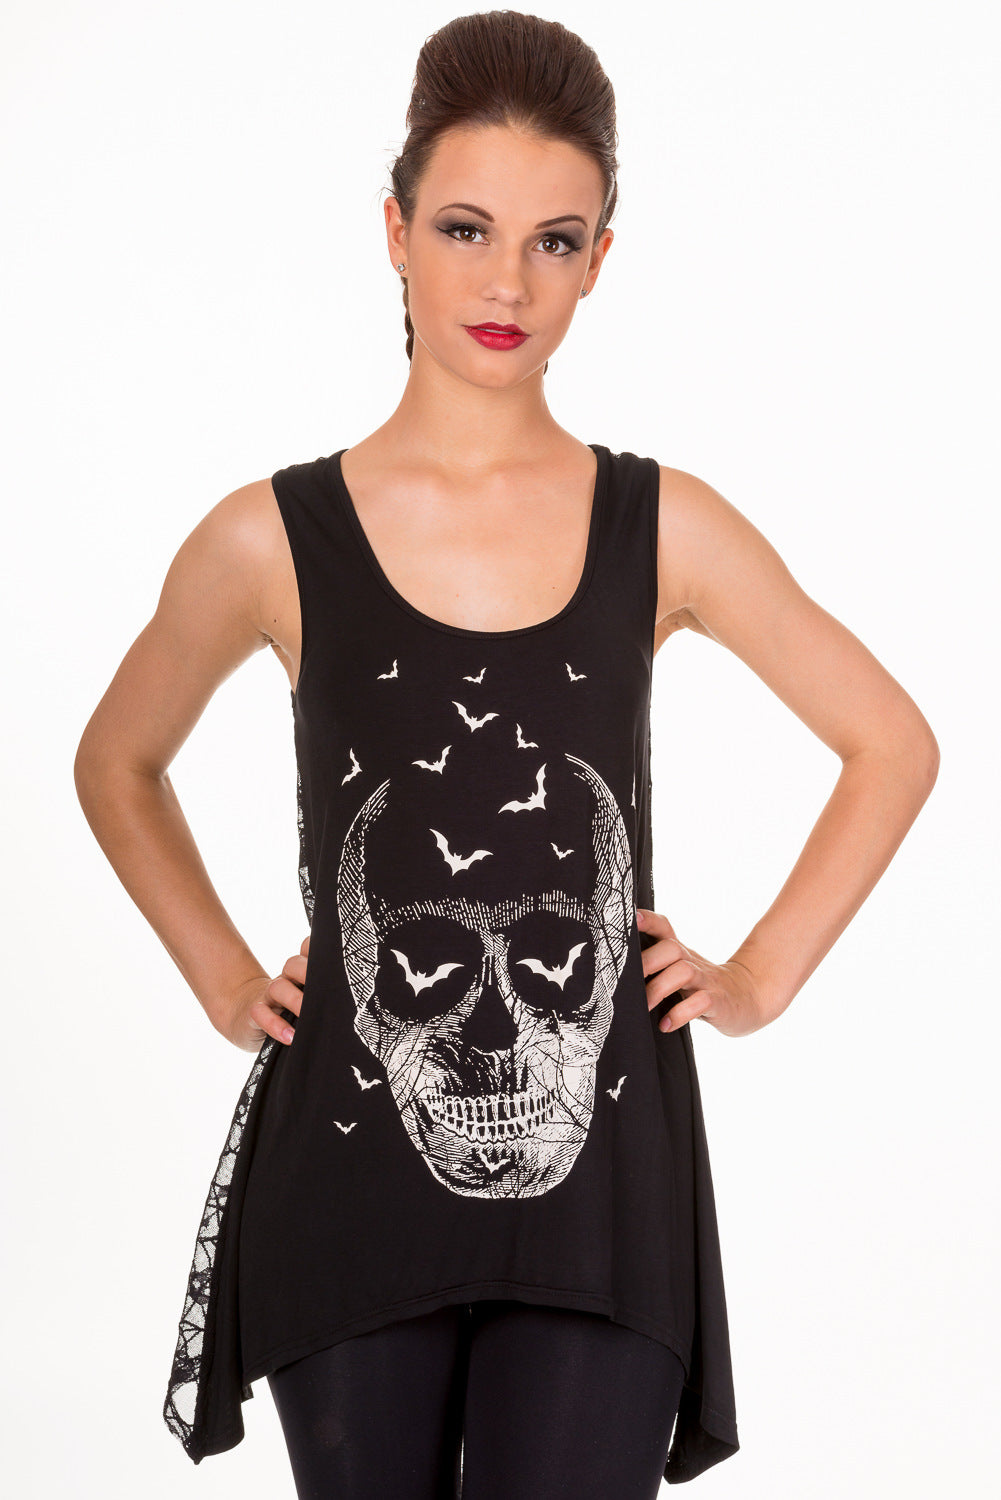 Model wearing long line black vest top with white skull print and bats 